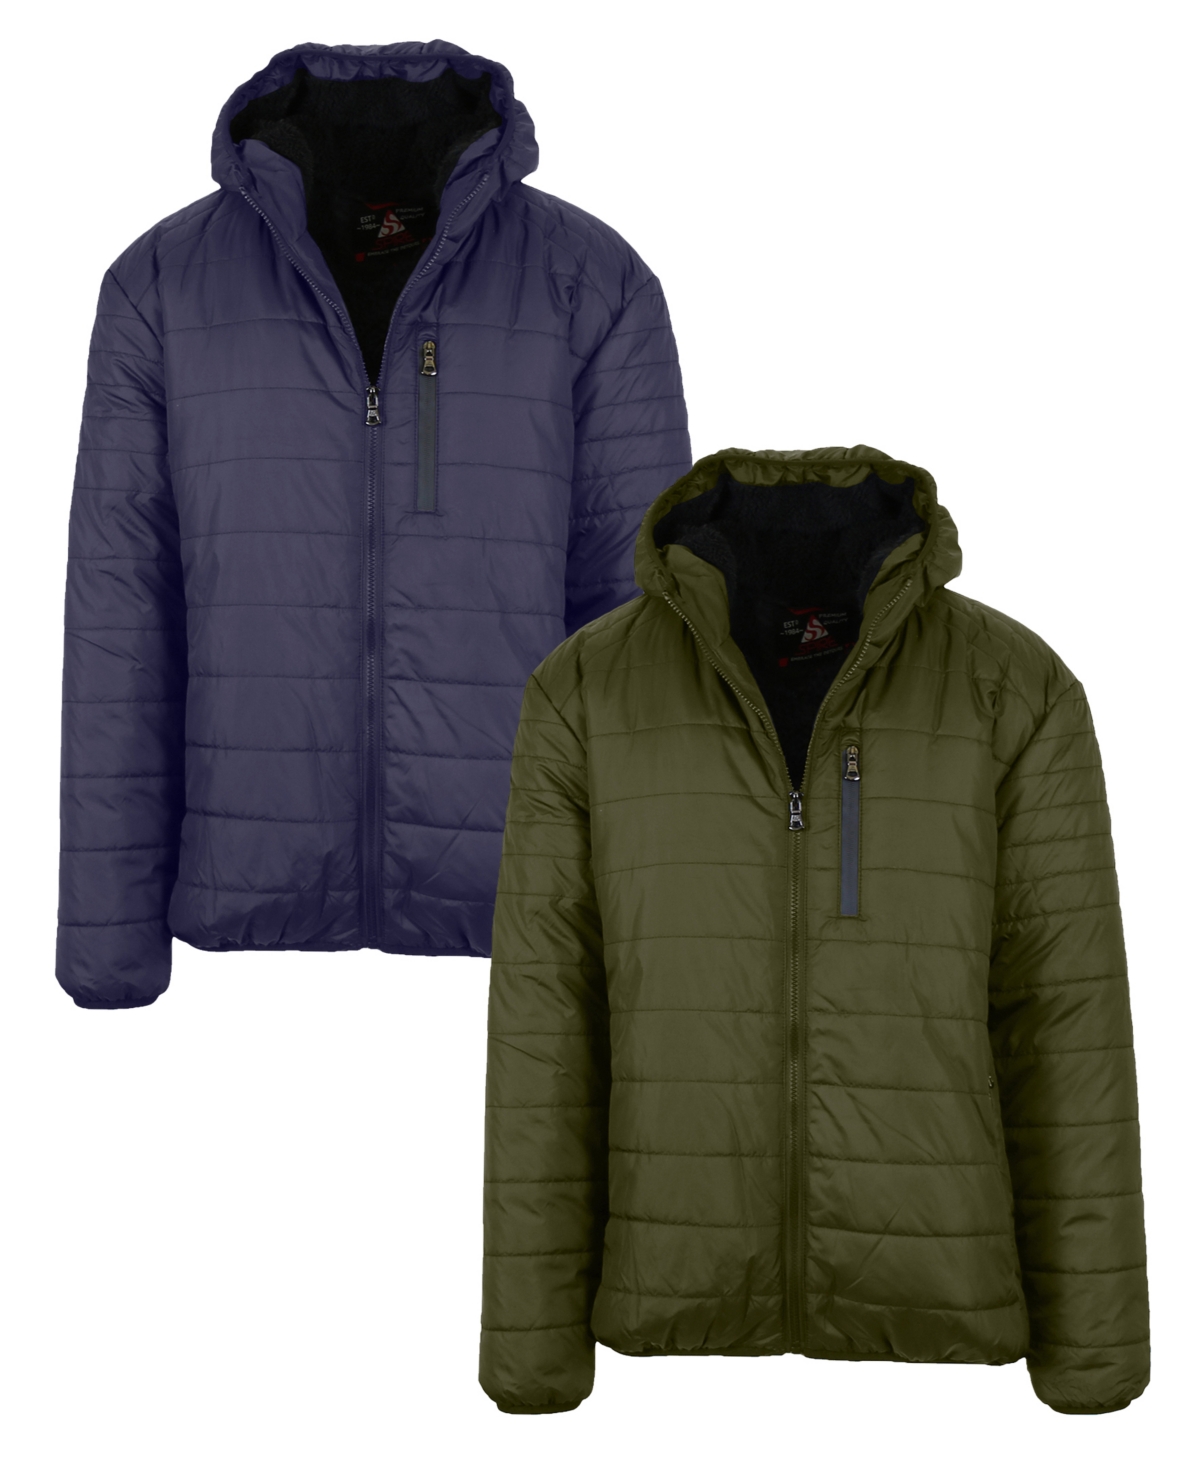 Men's Sherpa Lined Hooded Puffer Jacket, Pack of 2 - Olive-Charcoal